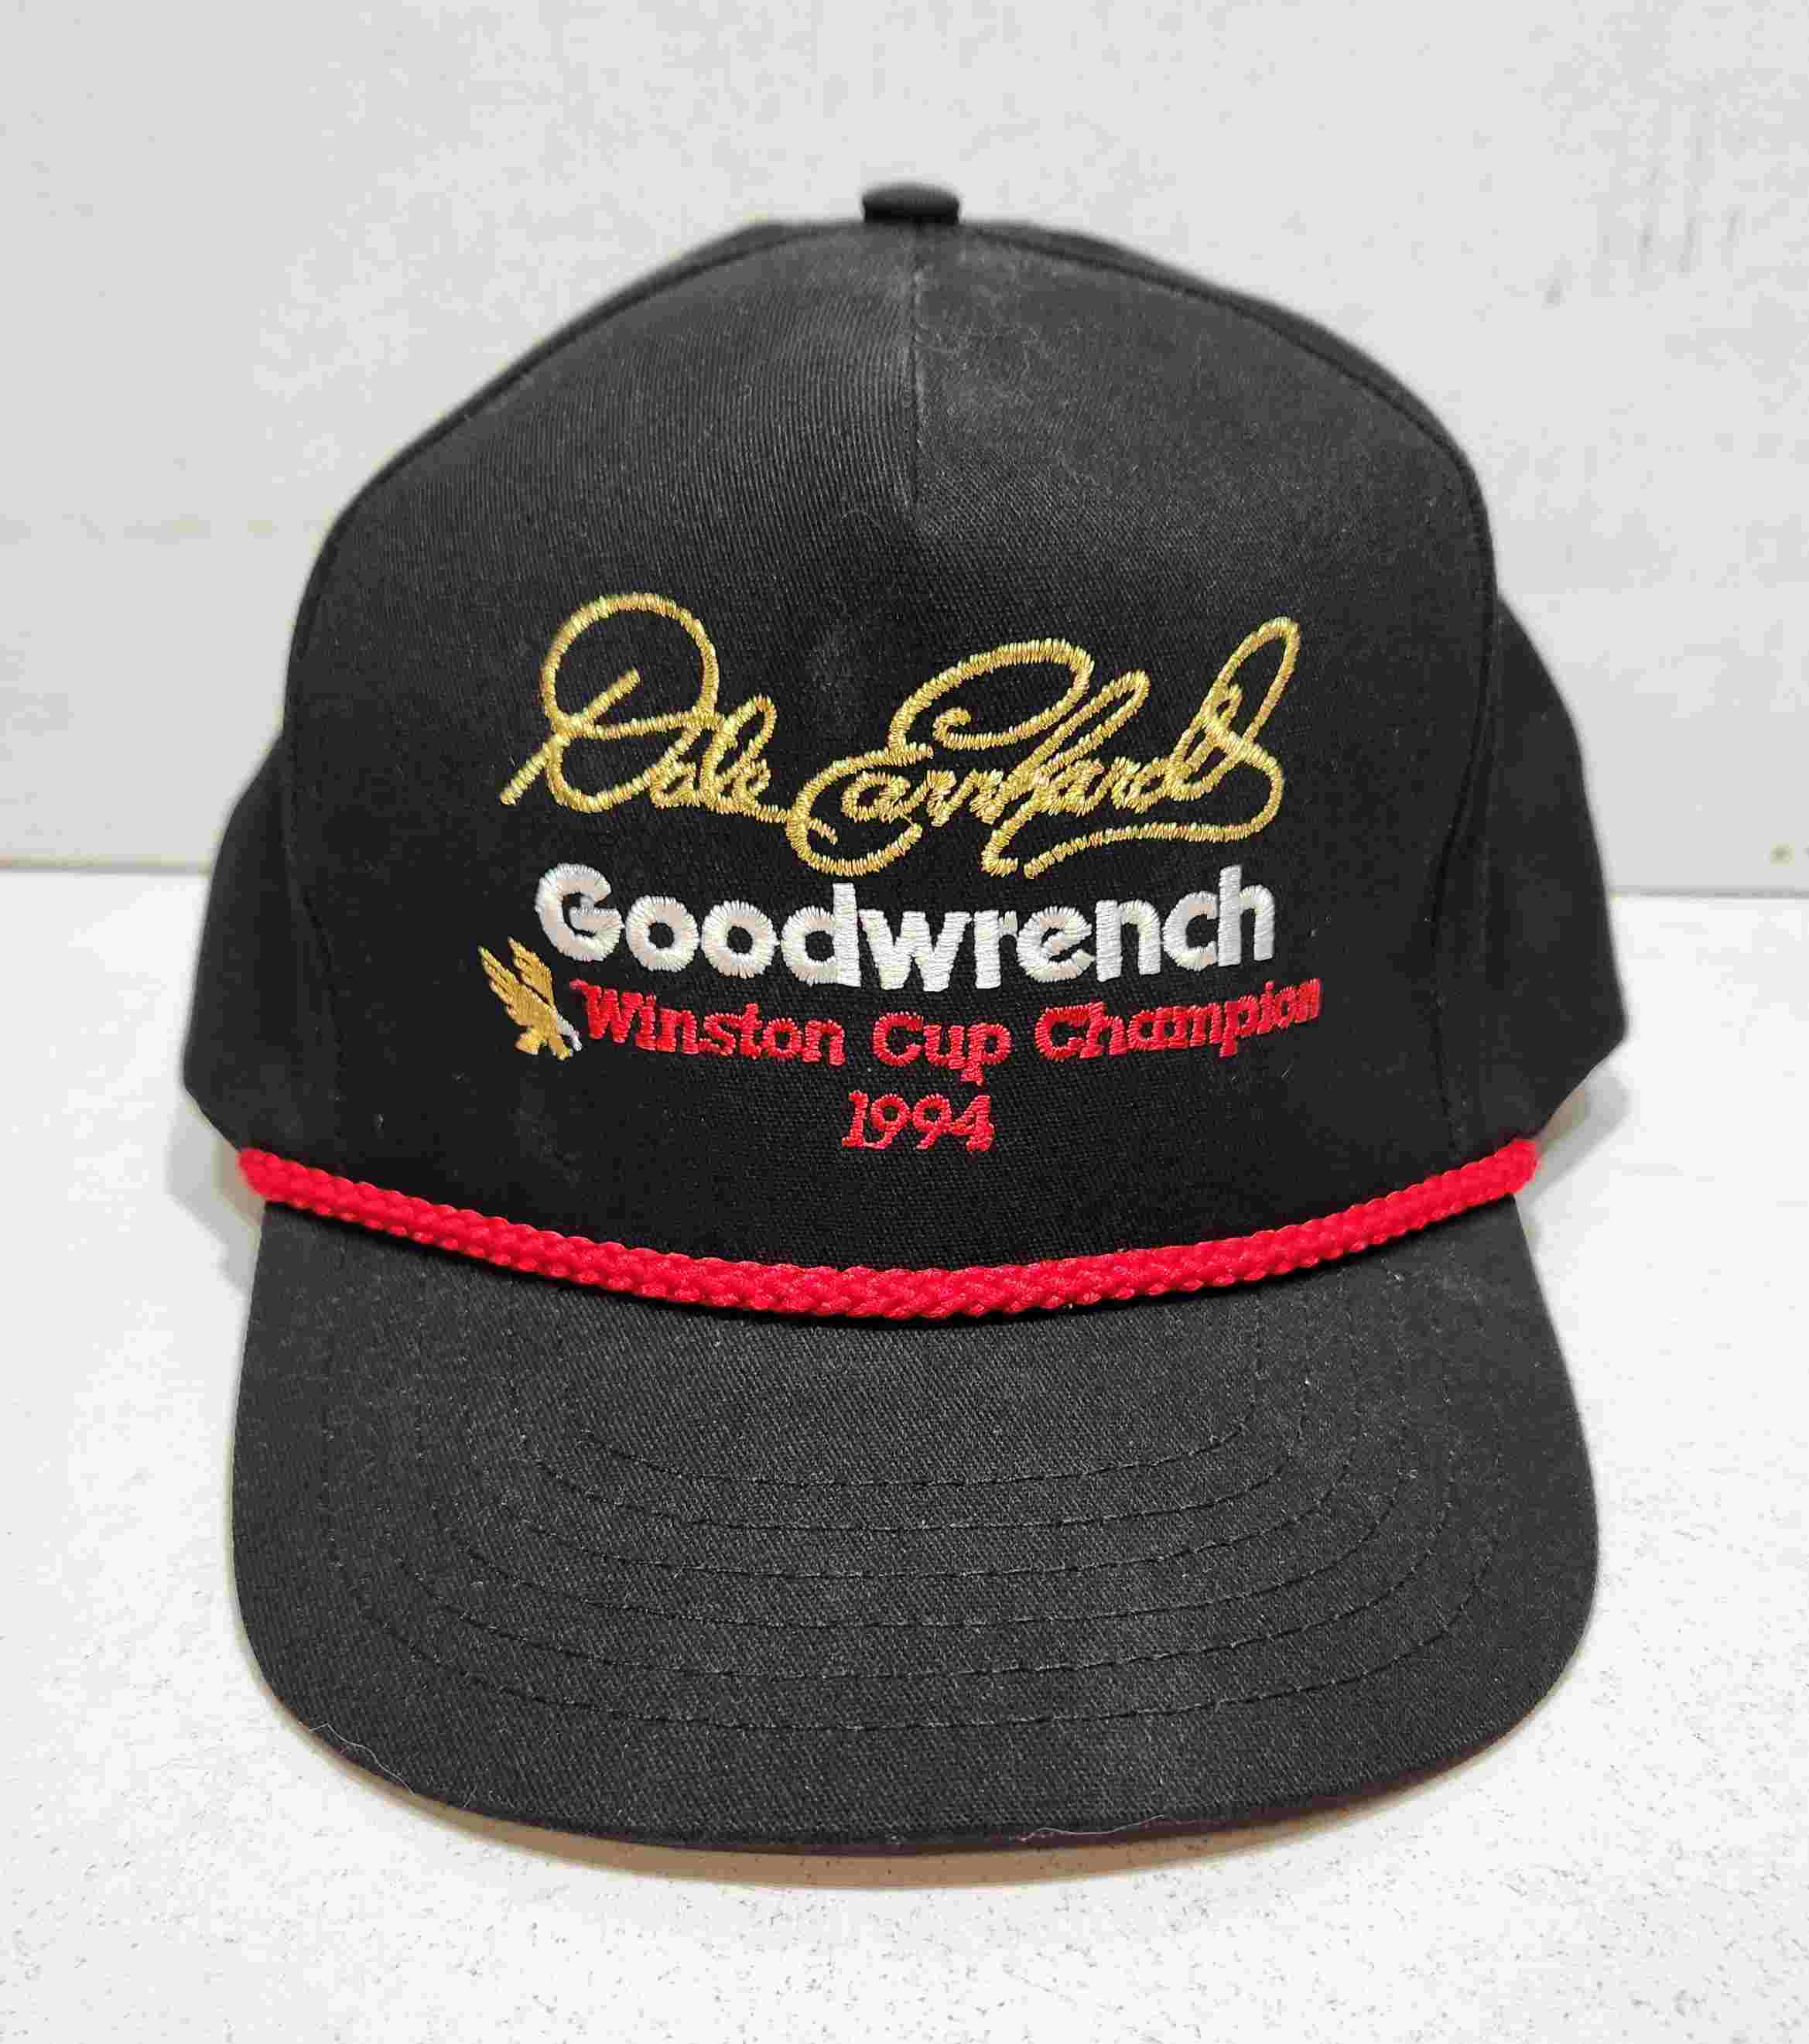 1994 Dale Earnhardt Goodwrench "Winston Cup Champion" cap by Sports Image